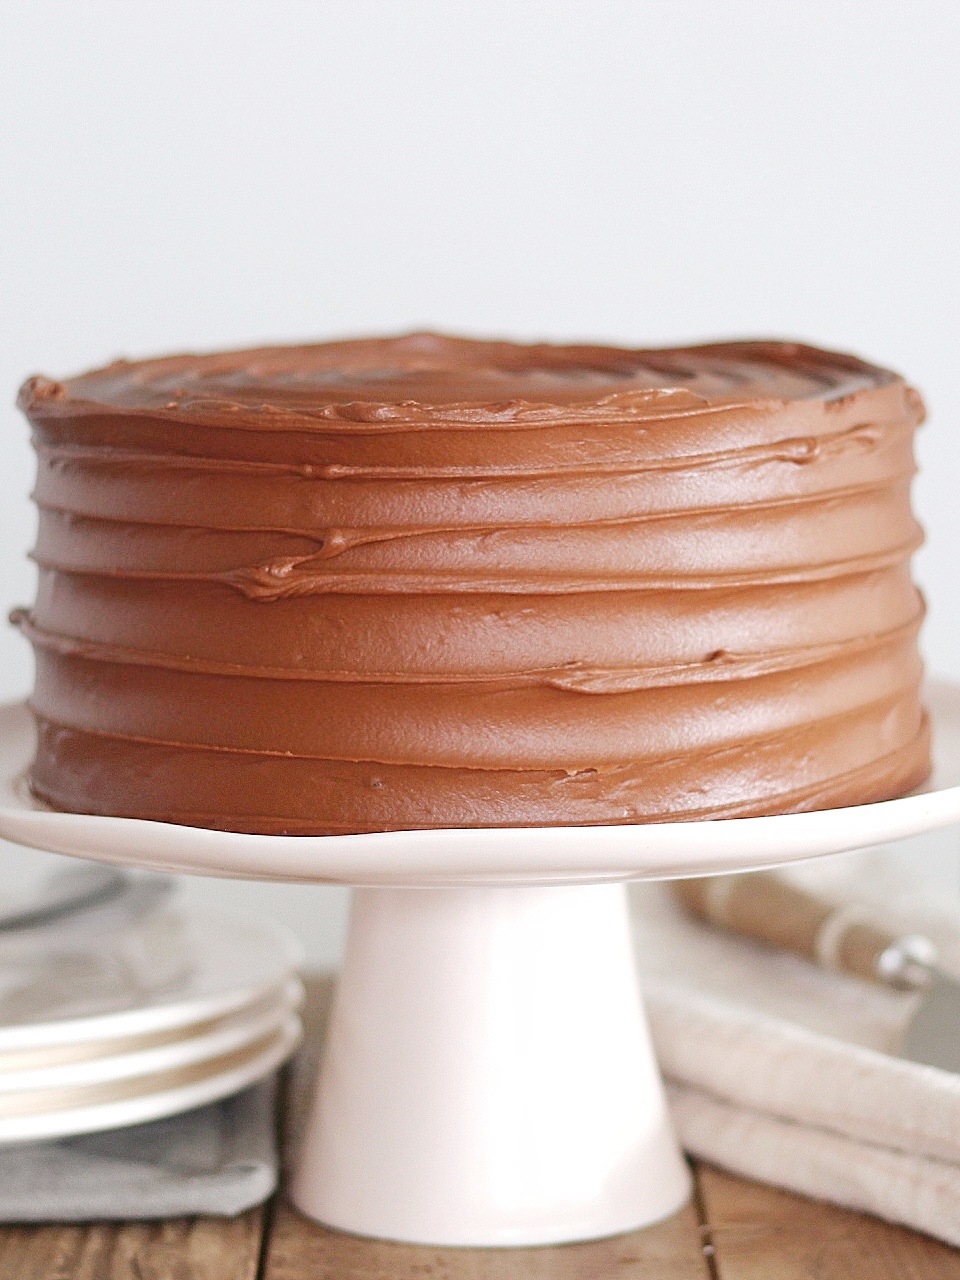 the best tasting chocolate cake you'll ever try. www.cakebycourtney.com